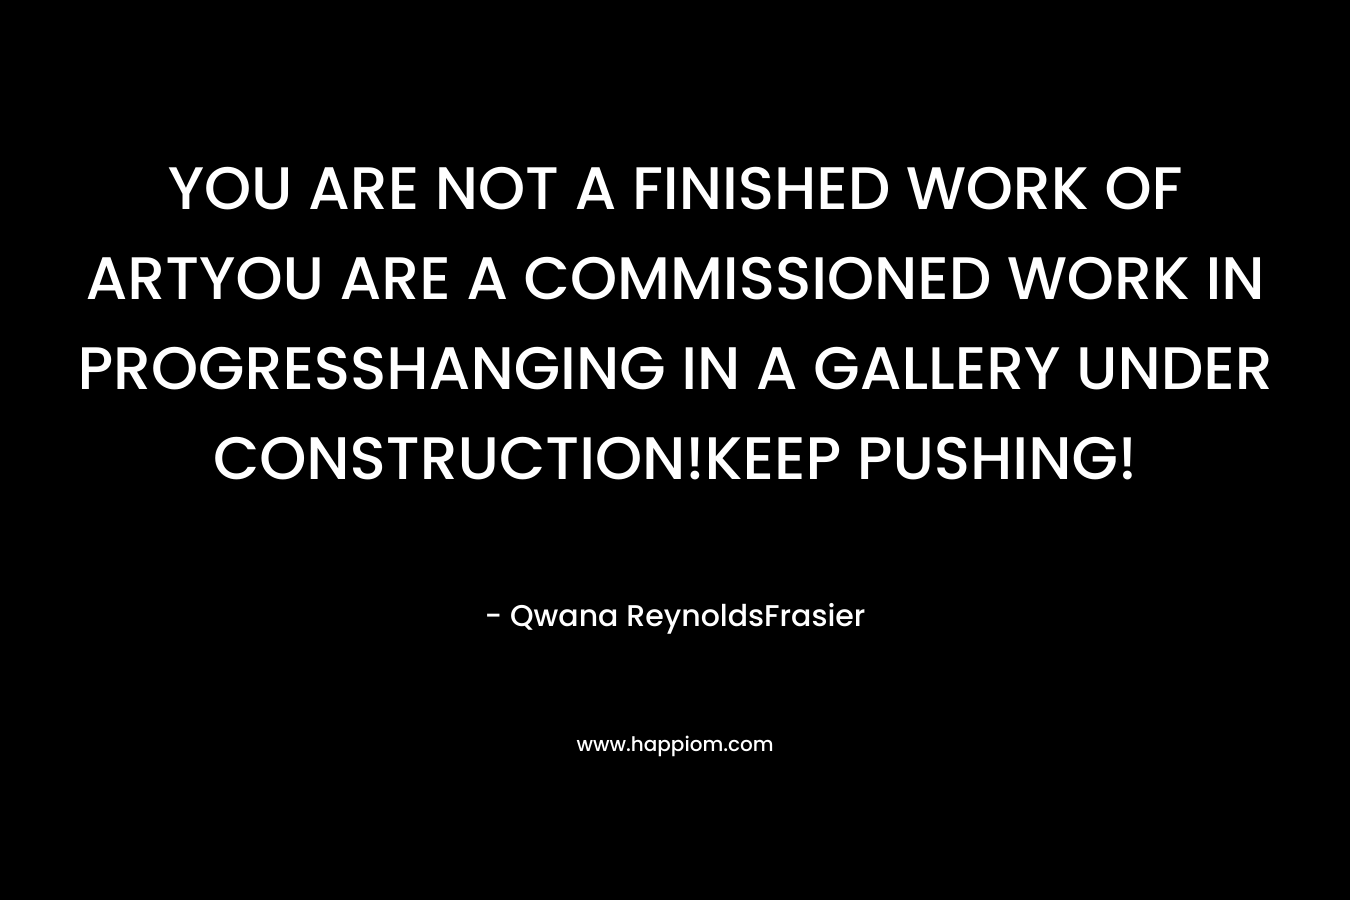 YOU ARE NOT A FINISHED WORK OF ARTYOU ARE A COMMISSIONED WORK IN PROGRESSHANGING IN A GALLERY UNDER CONSTRUCTION!KEEP PUSHING! – Qwana ReynoldsFrasier